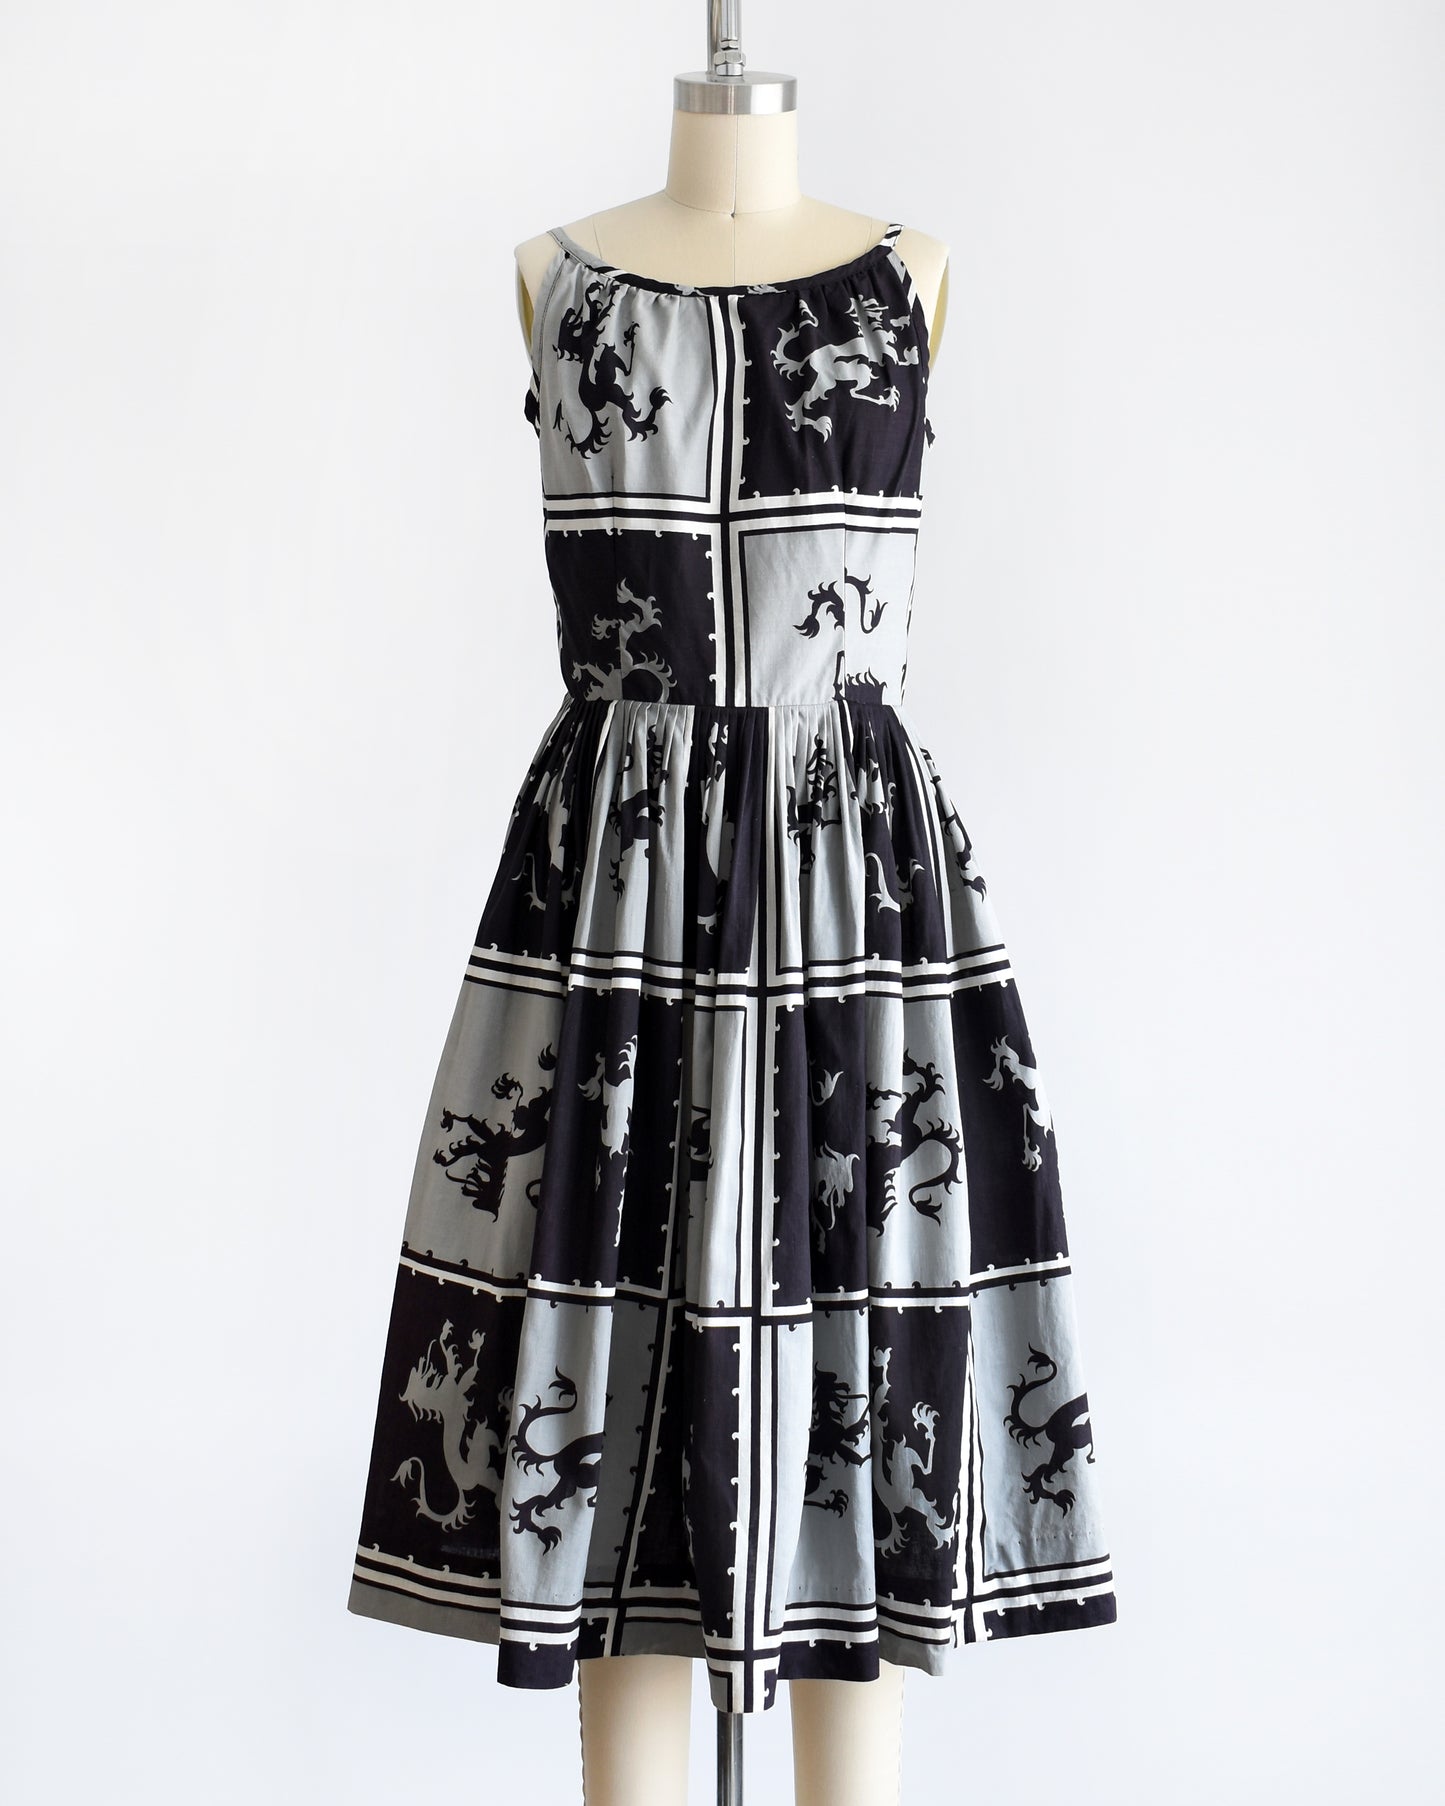 A vintage 1950s  that has a black and light gray checkered pattern with a Scottish lion in each center, framed by black and white stripes. The dress is shown without a crinoline slip underneath.